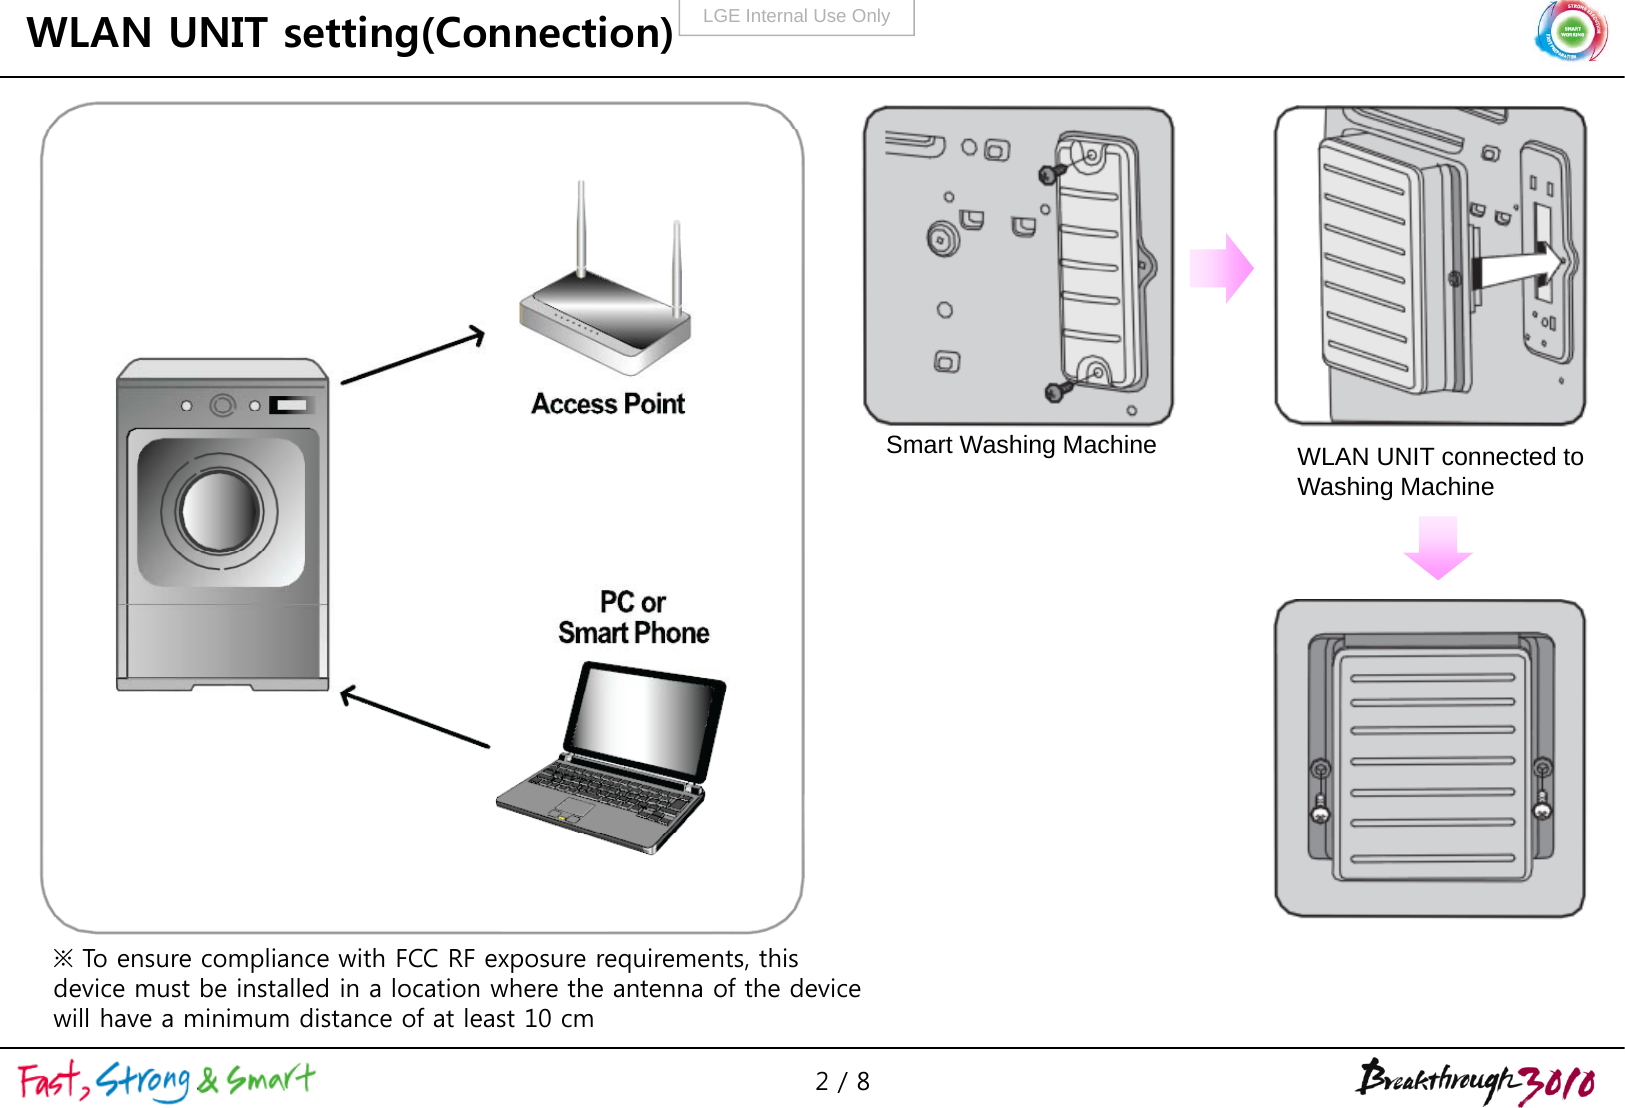 LGE Internal Use OnlyWLAN UNIT setting(Connection) Smart Washing Machine WLAN UNIT connected to Washing Machine※ To ensure compliance with FCC RF exposure requirements, this 2 / 8 ppqdevice must be installed in a location where the antenna of the device will have a minimum distance of at least 10 cm 